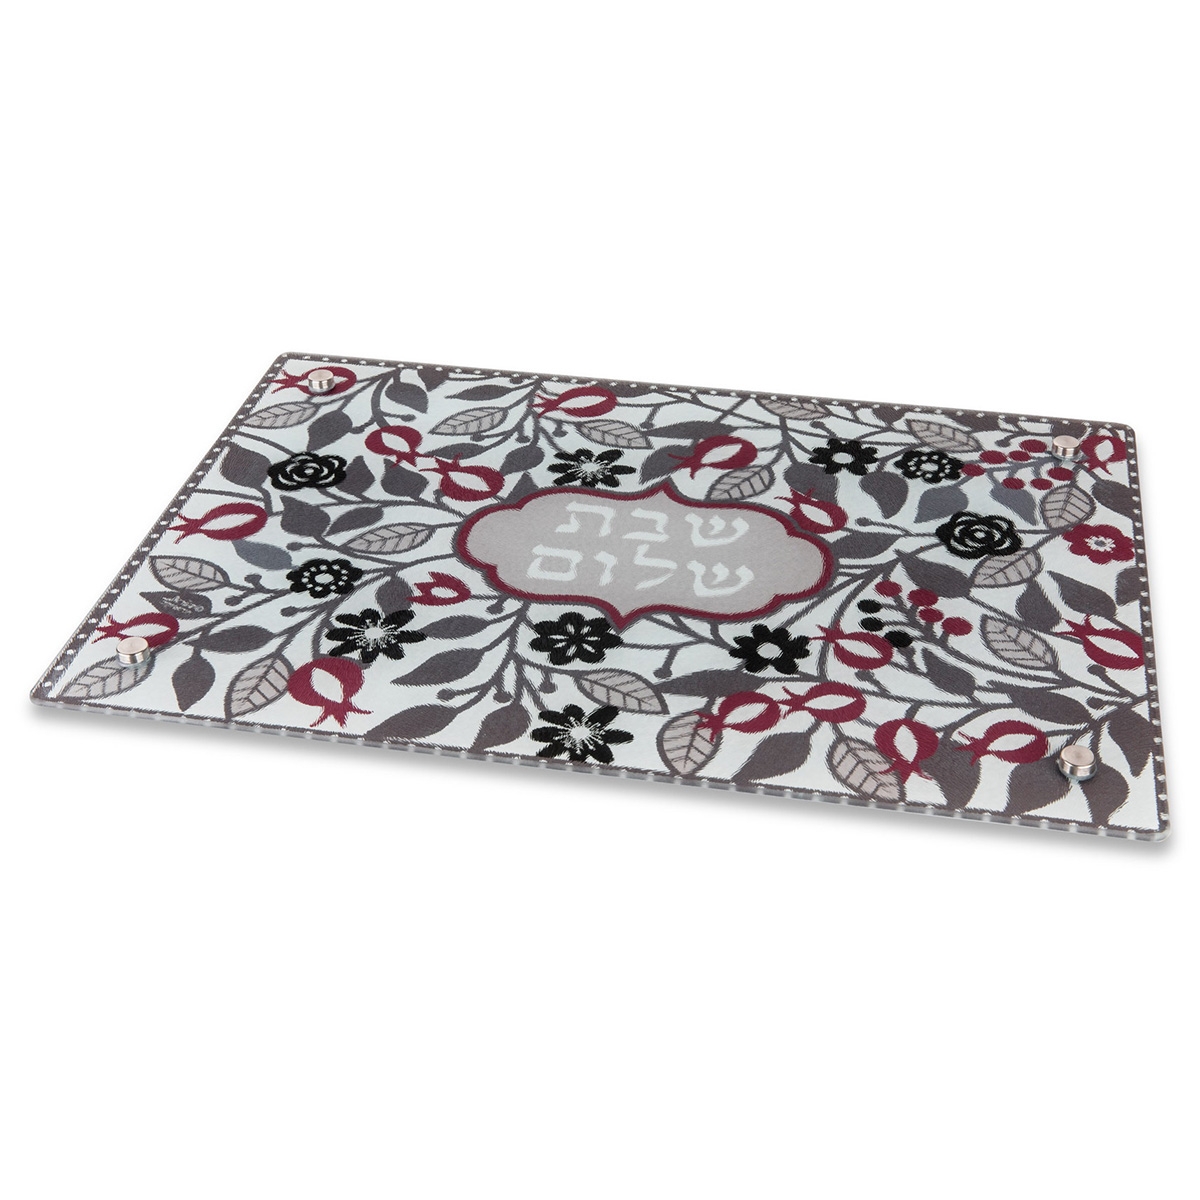 Designer Challah Board With Pomegranate Motif By Dorit Judaica (Red & White) - 1